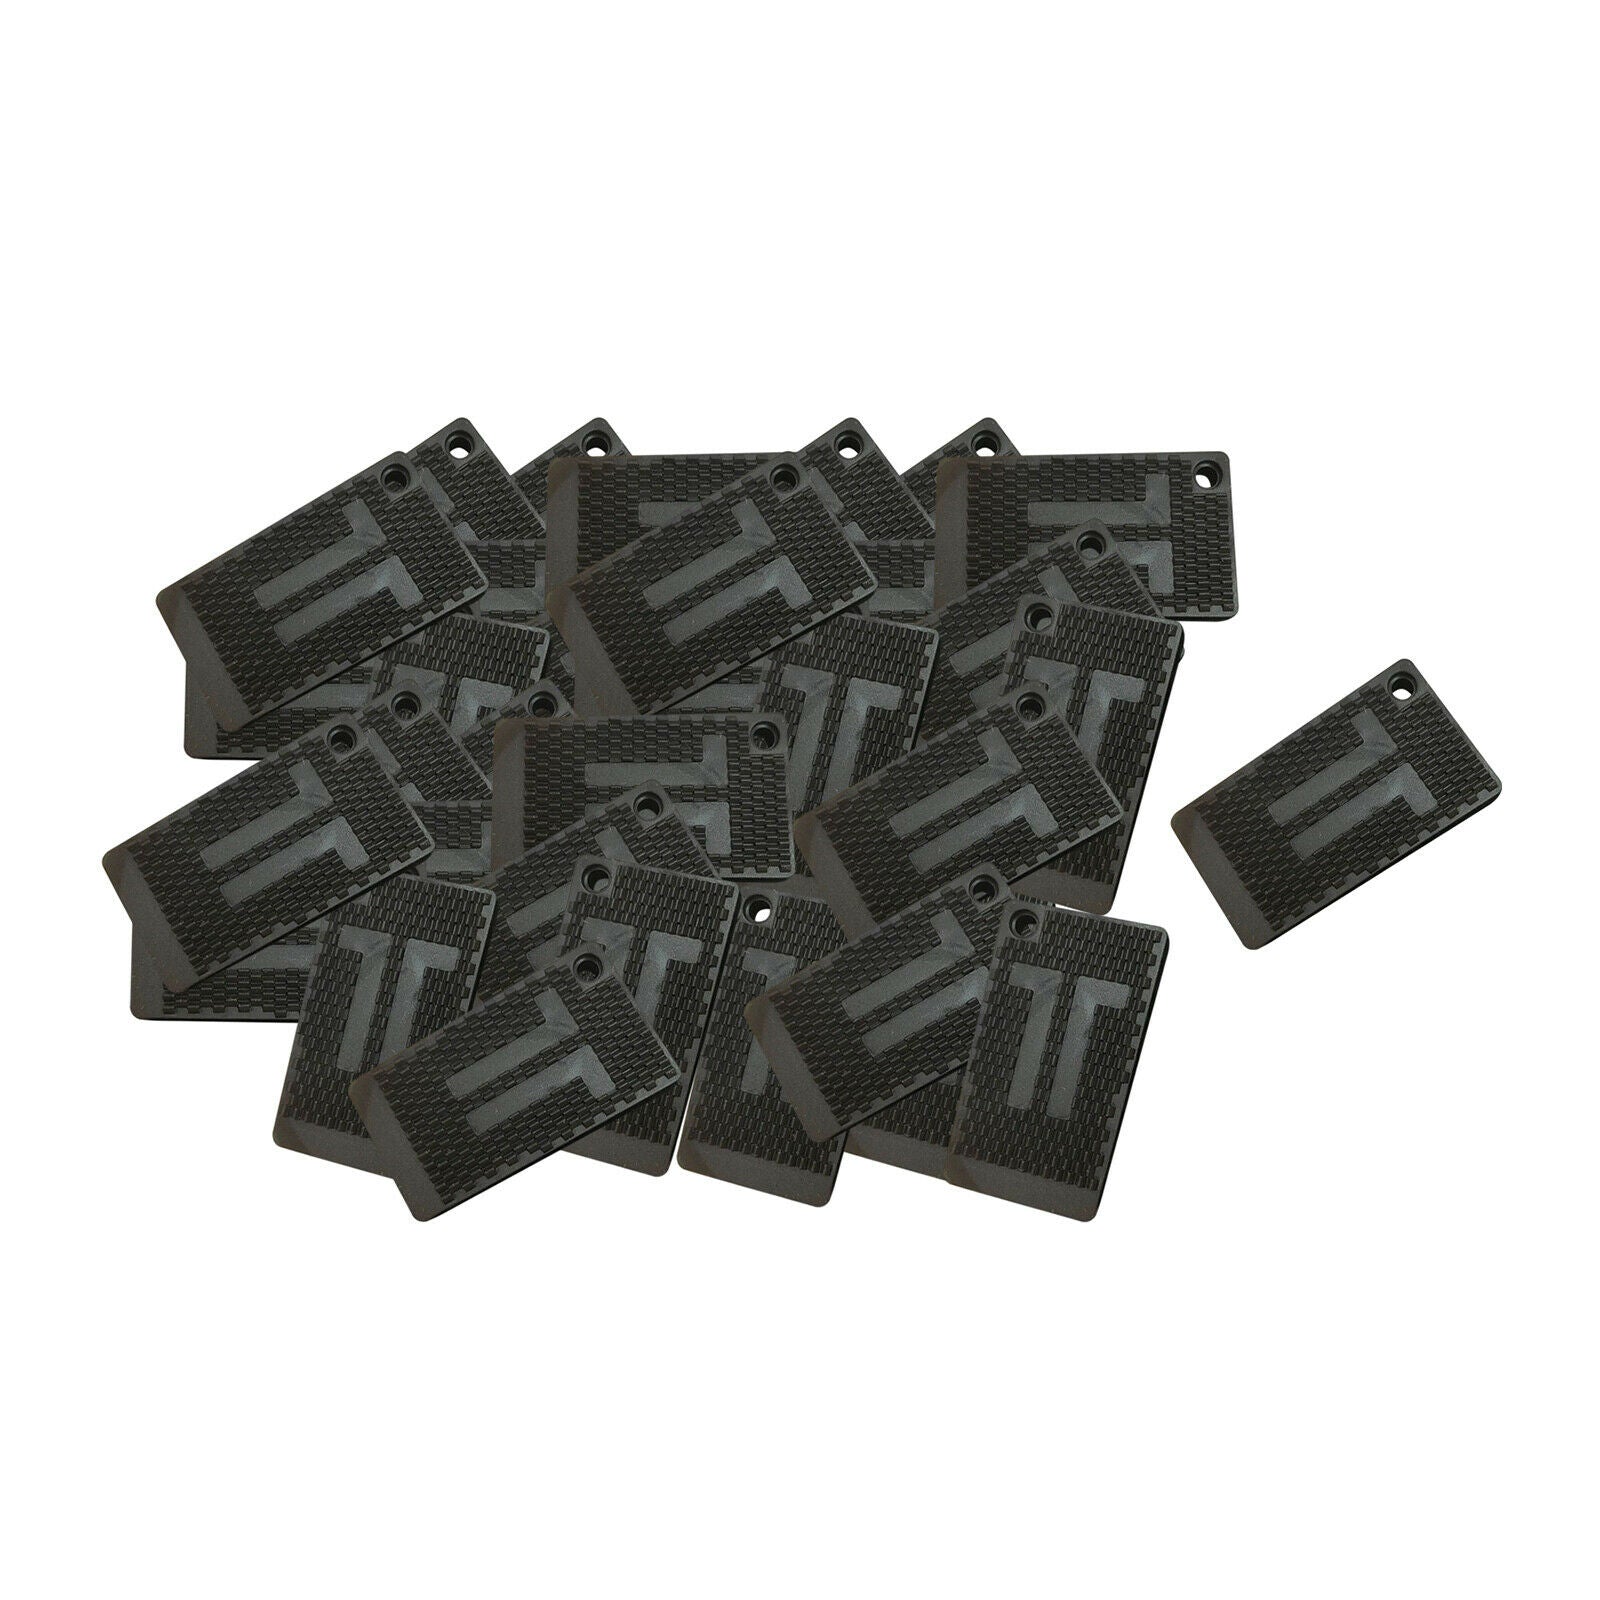 35x Table Shims Rubber Grooved Non-slip Furniture Levelers Stabilizing Pads